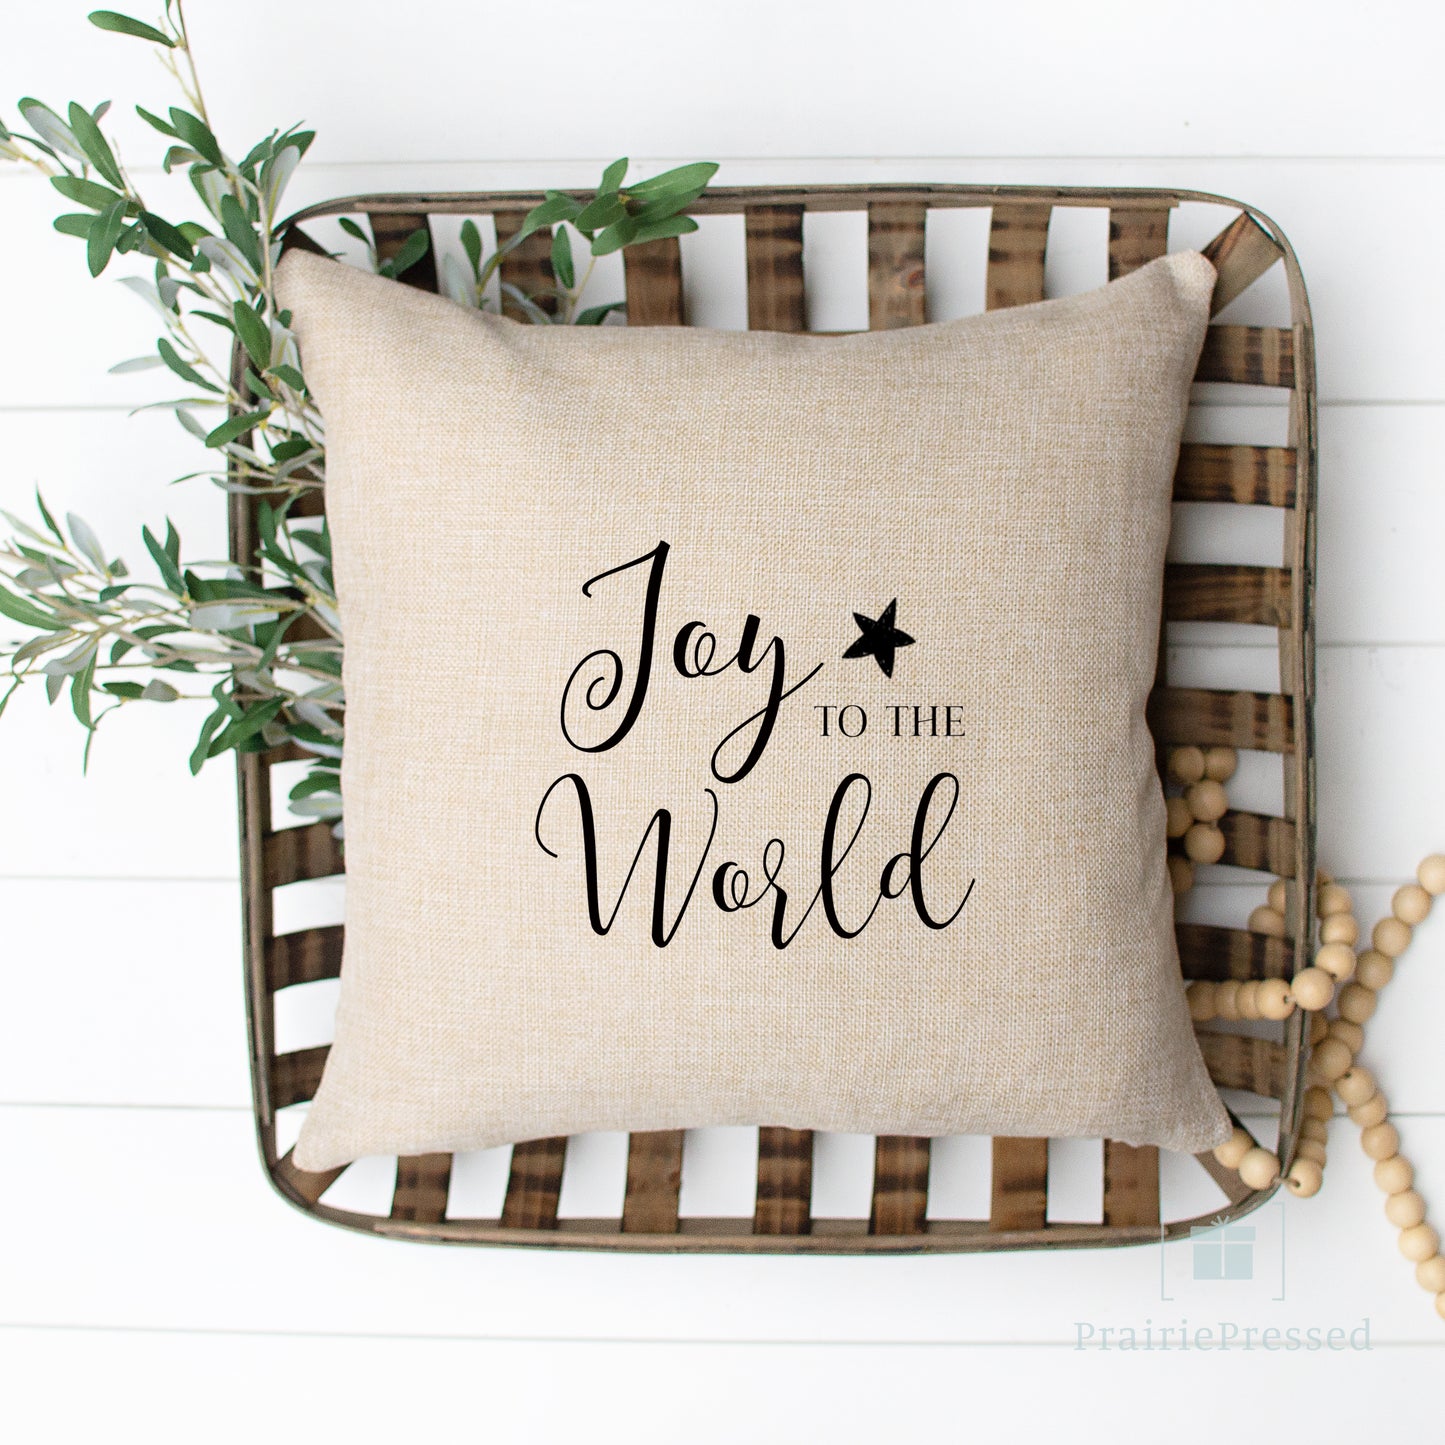 Joy to the World Pillow Cover